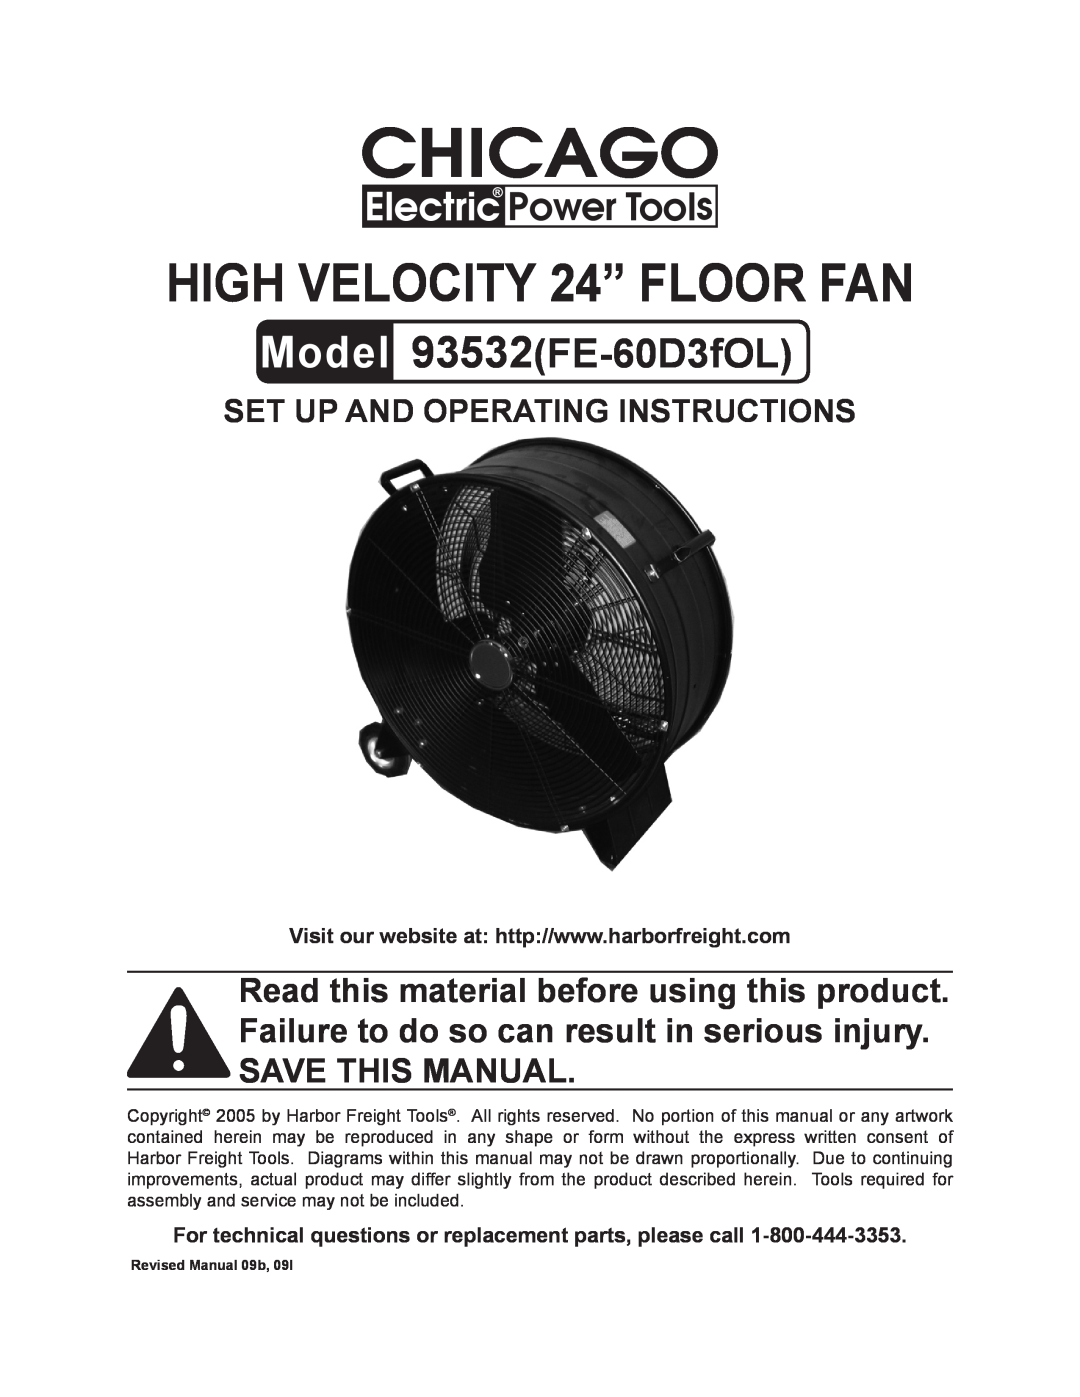 Harbor Freight Tools manual HIGH VELOCITY 24” FLOOR FAN, Model 93532FE-60D3fOL, Set up and Operating Instructions 